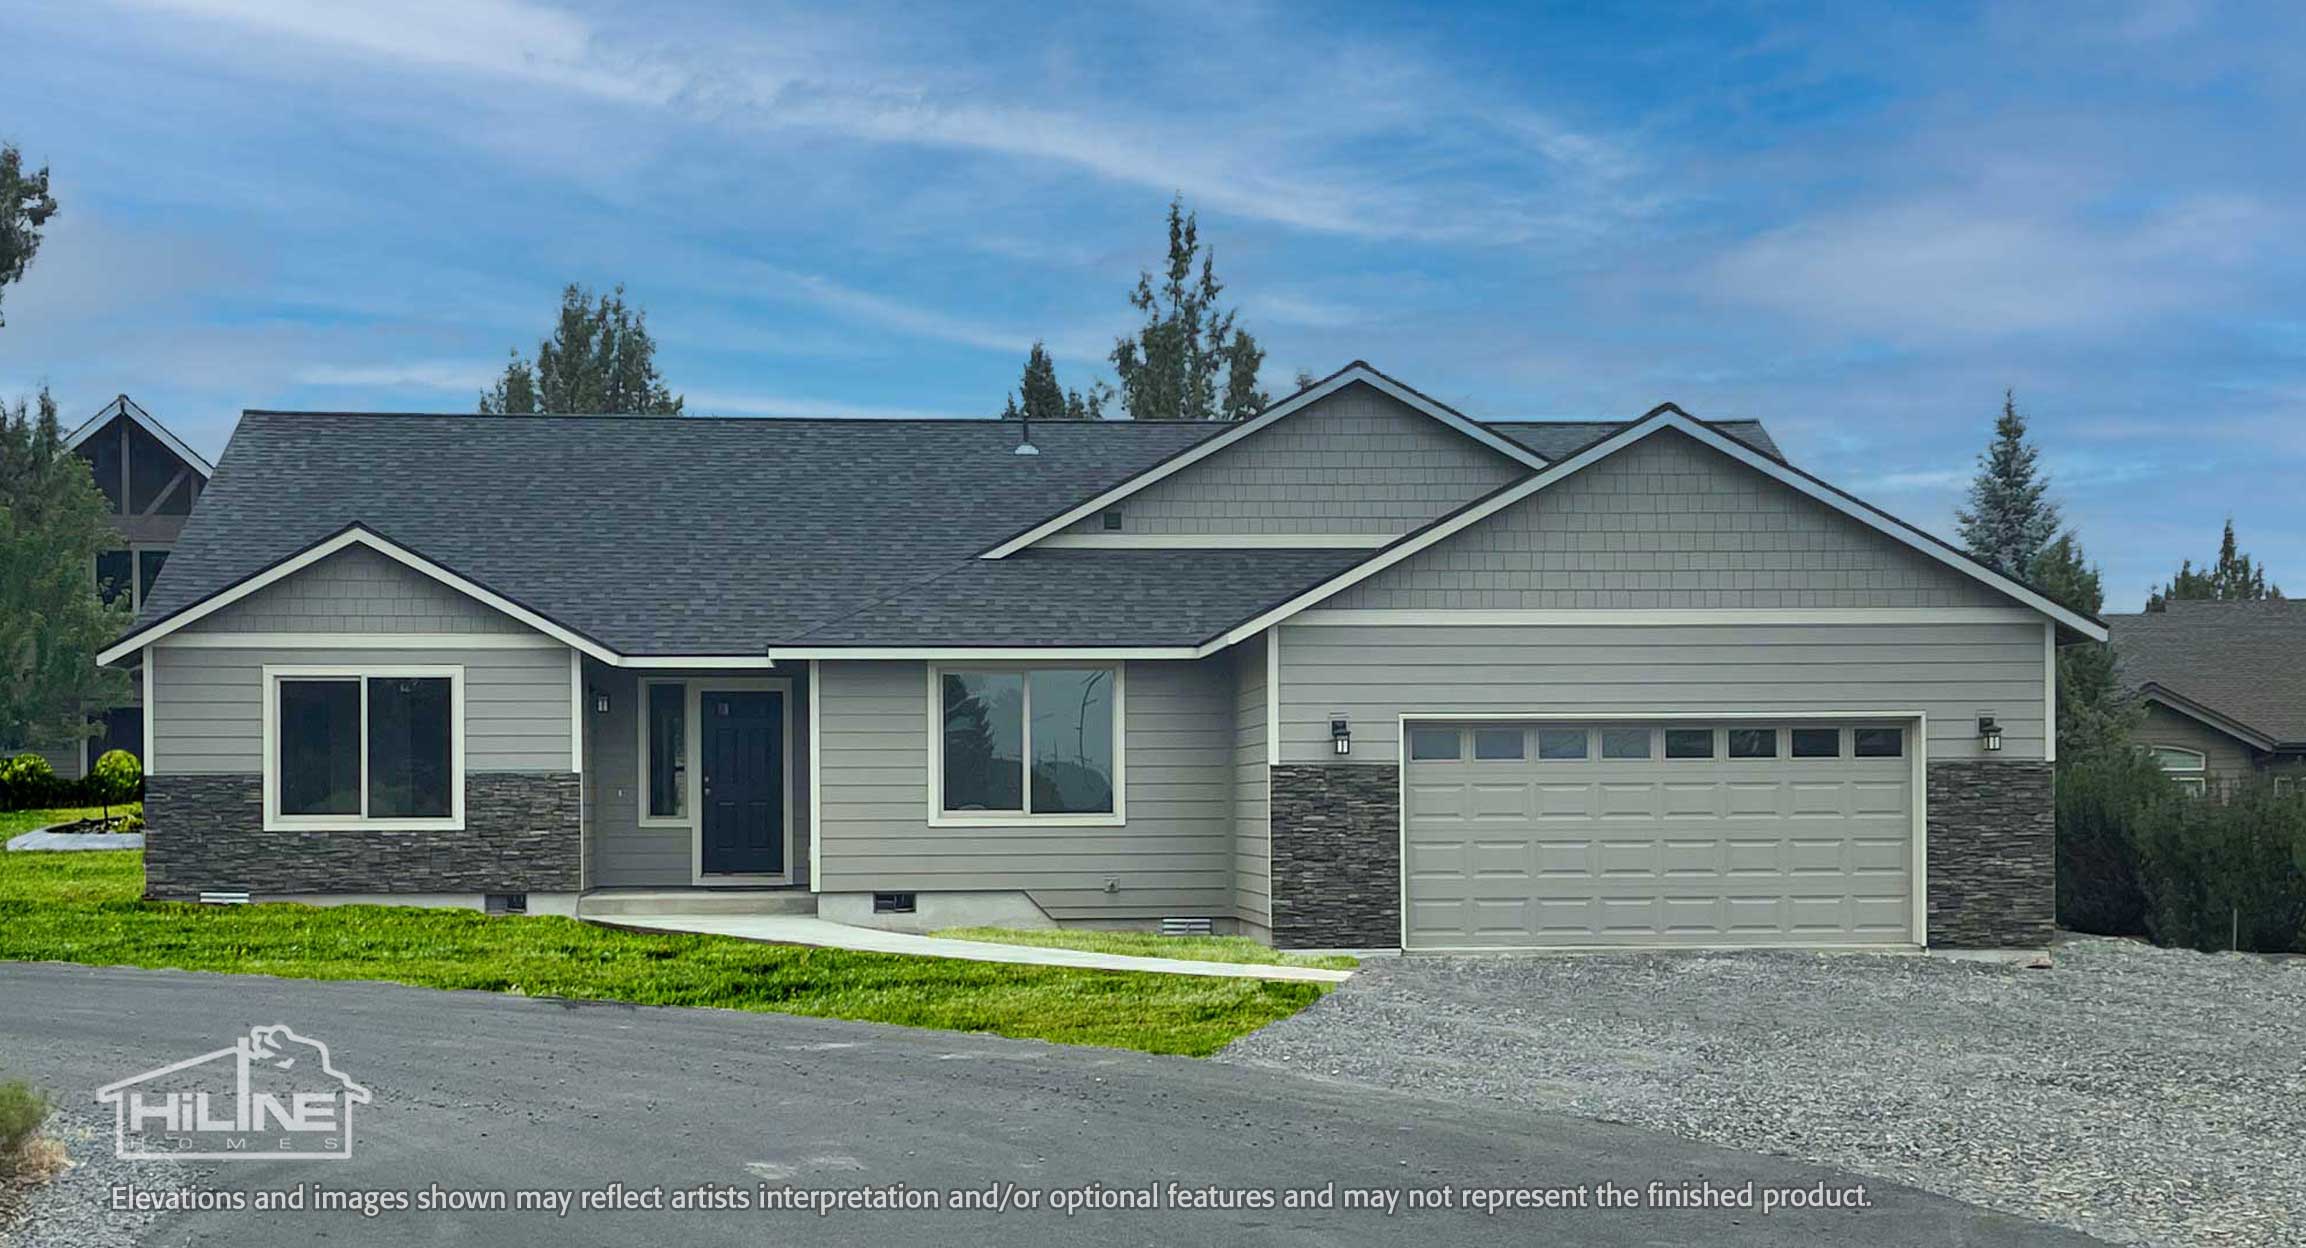 Image of Home Plan 2270 Front Exterior.